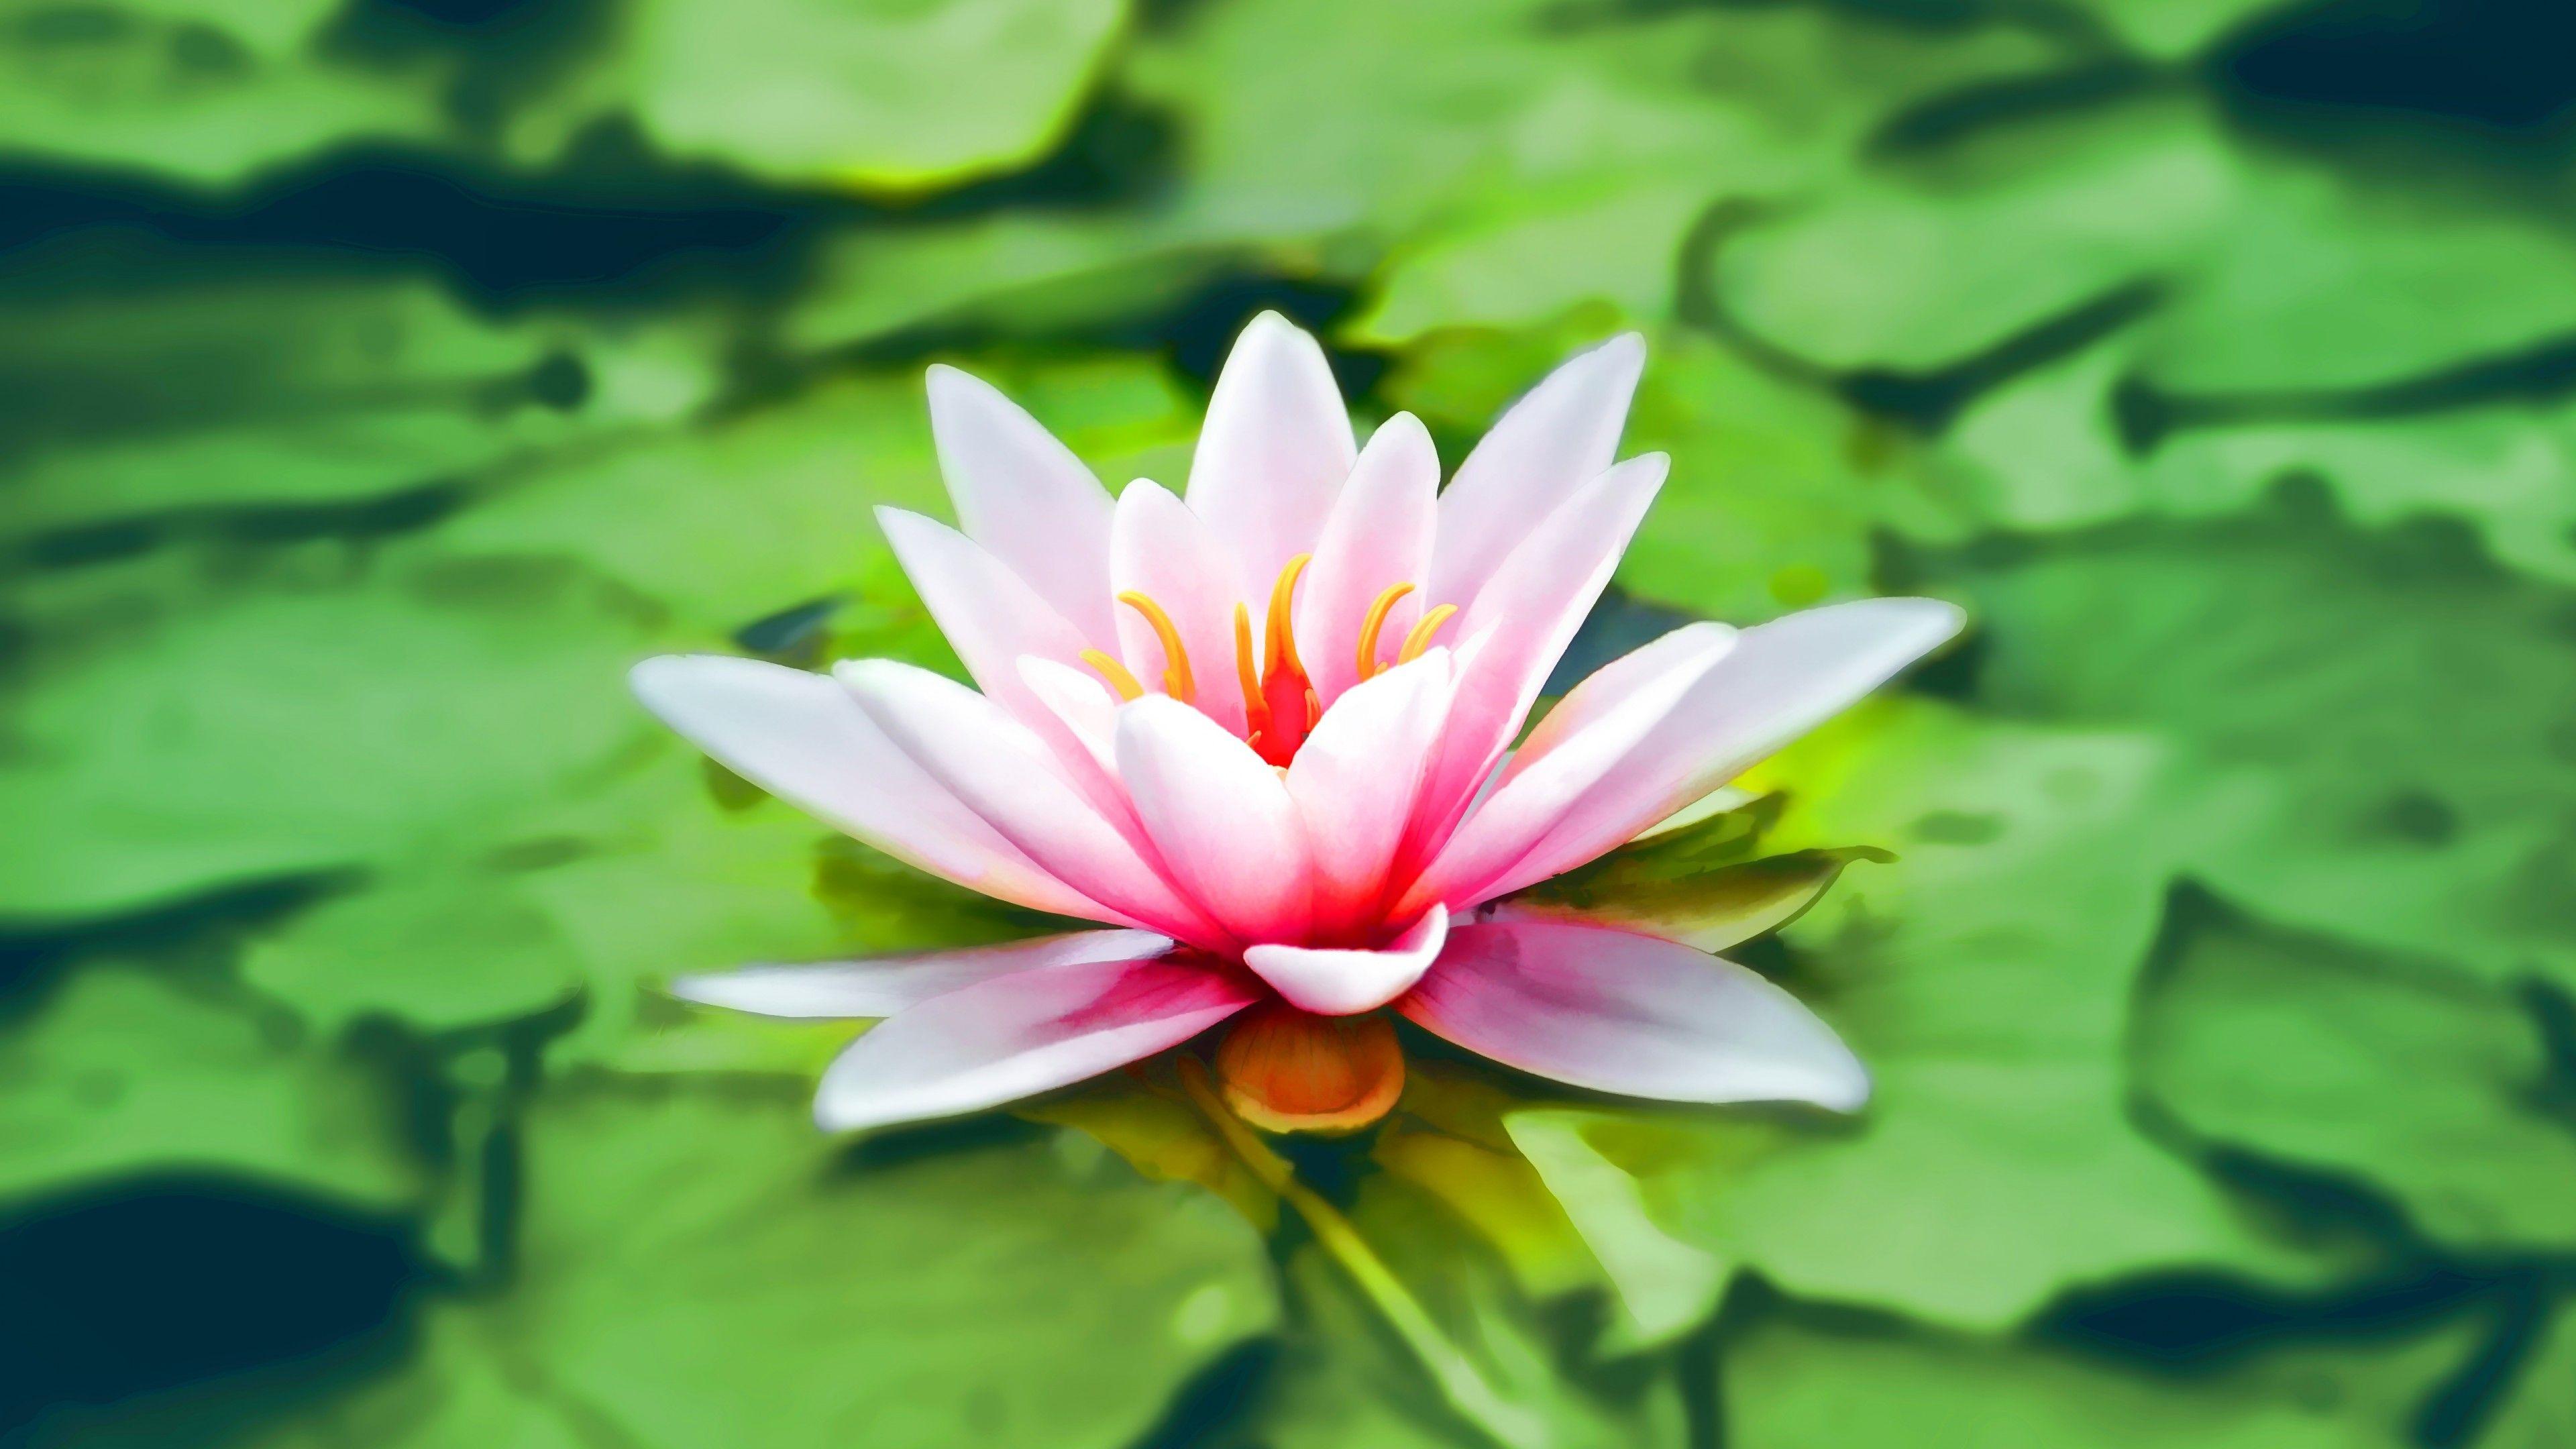 Wallpapers Of Water Lily - Wallpaper Cave